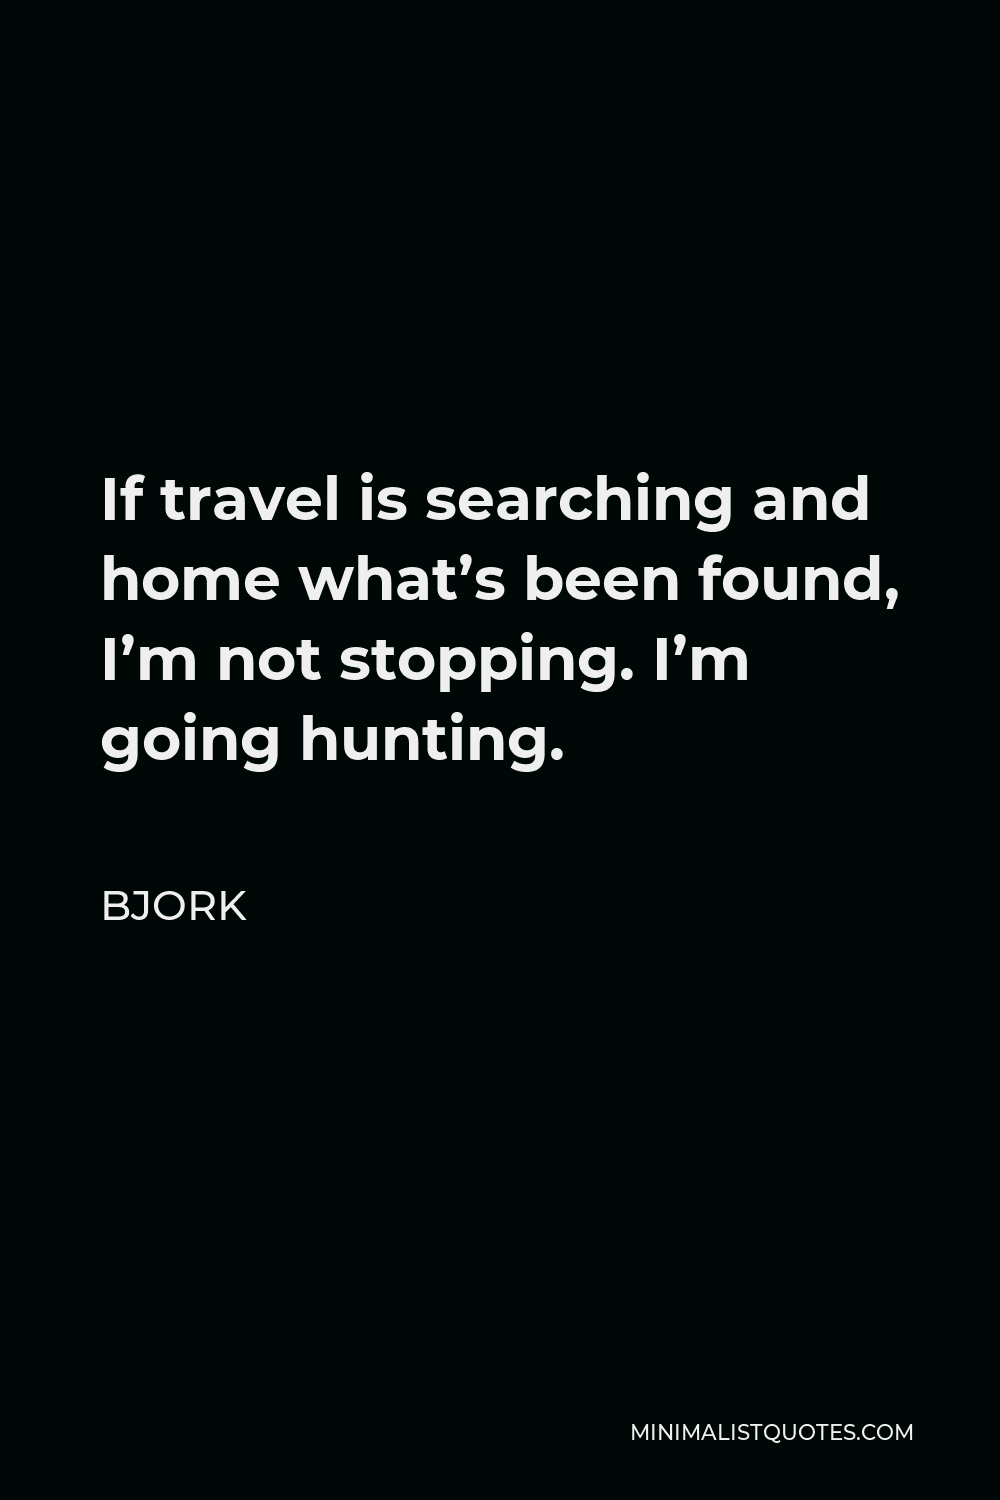 Bjork Quote - If travel is searching and home what’s been found, I’m not stopping. I’m going hunting.